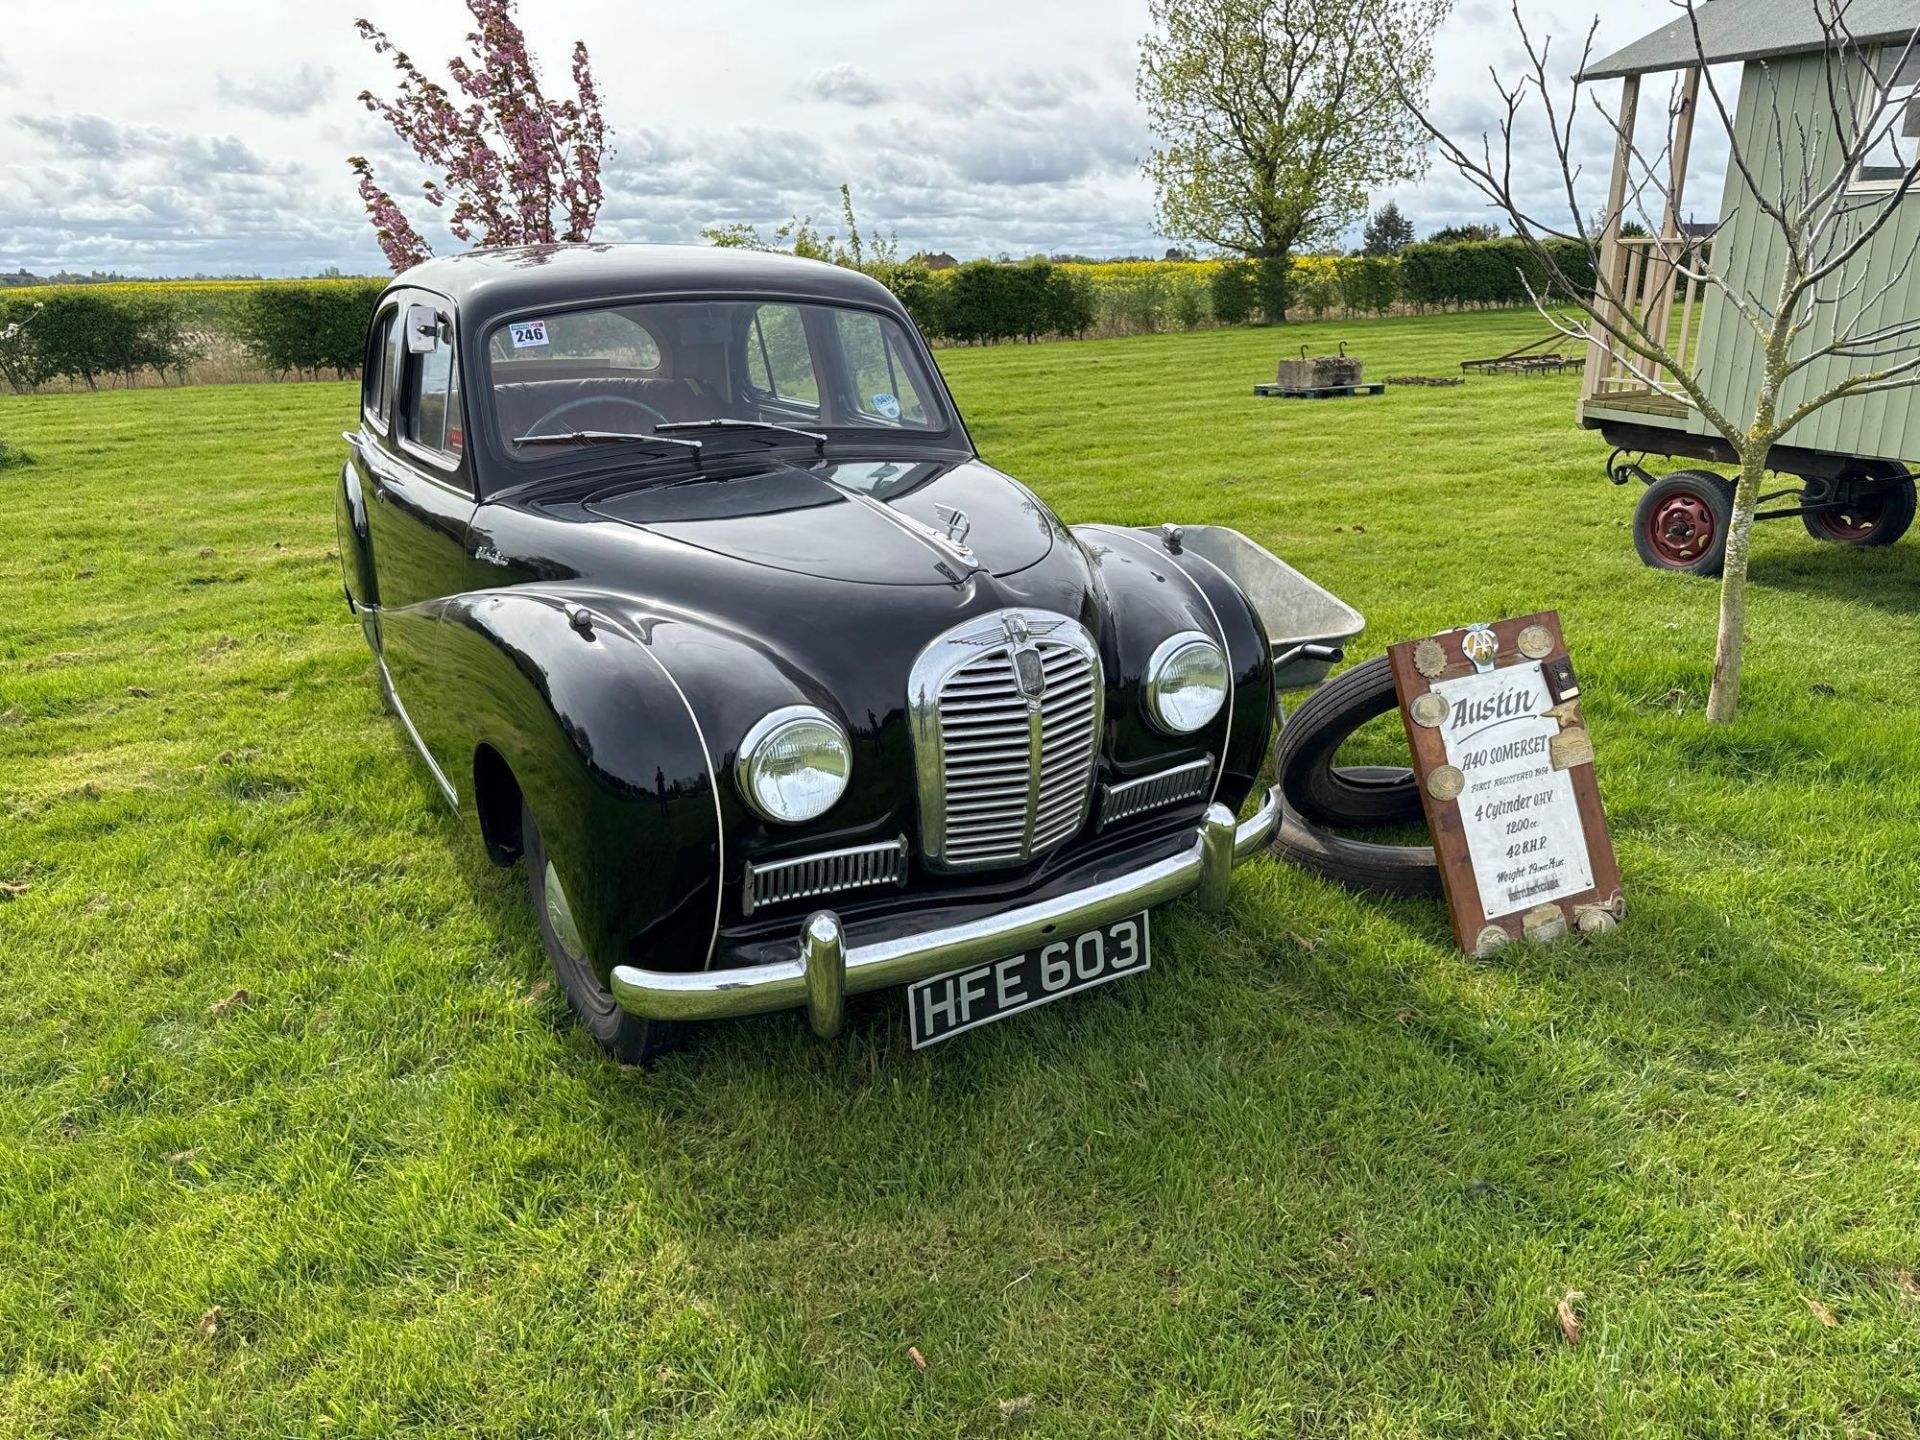 1954 Austin A40 Somerset black saloon car with 1200cc petrol engine, red leather interior and spare